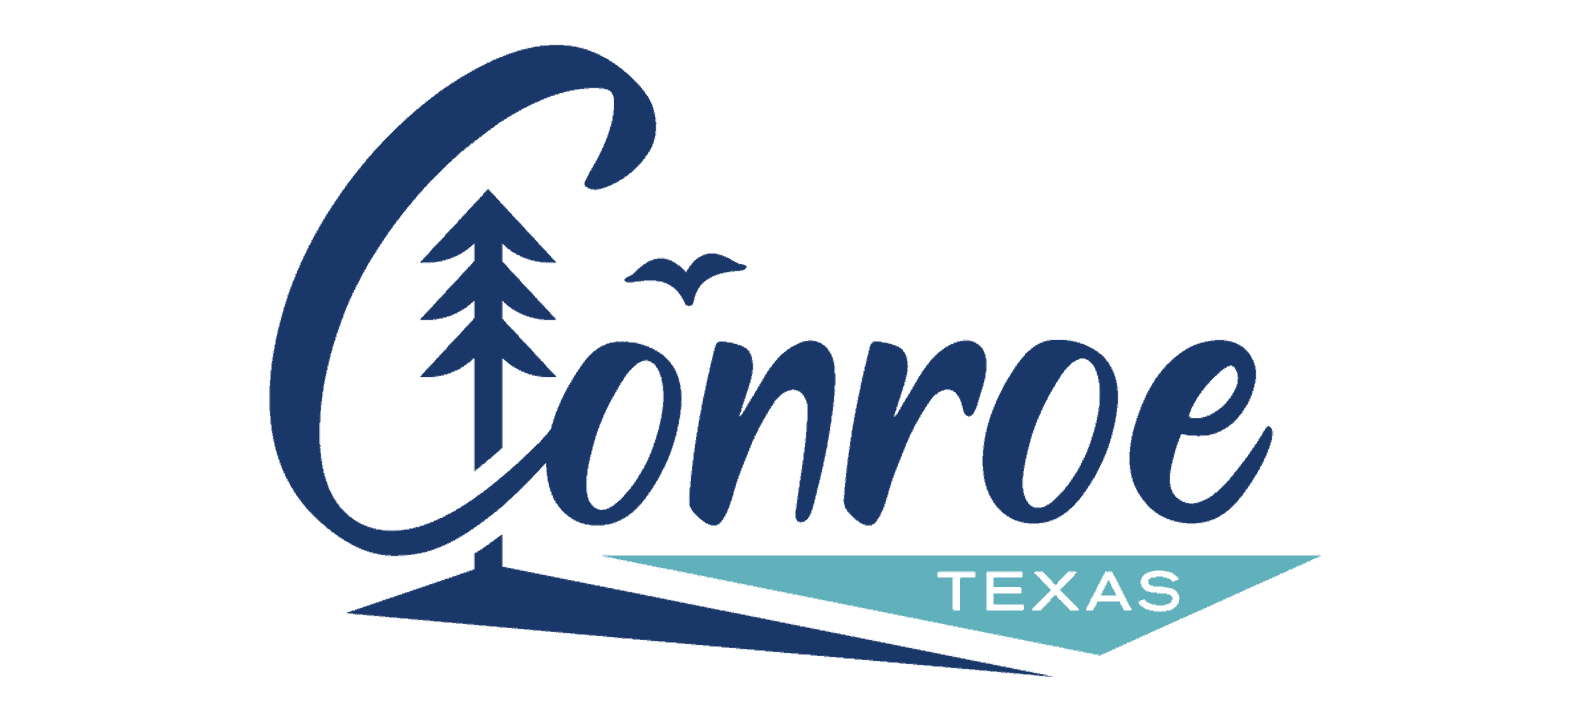 Conroe Texas Logo in White and Blue